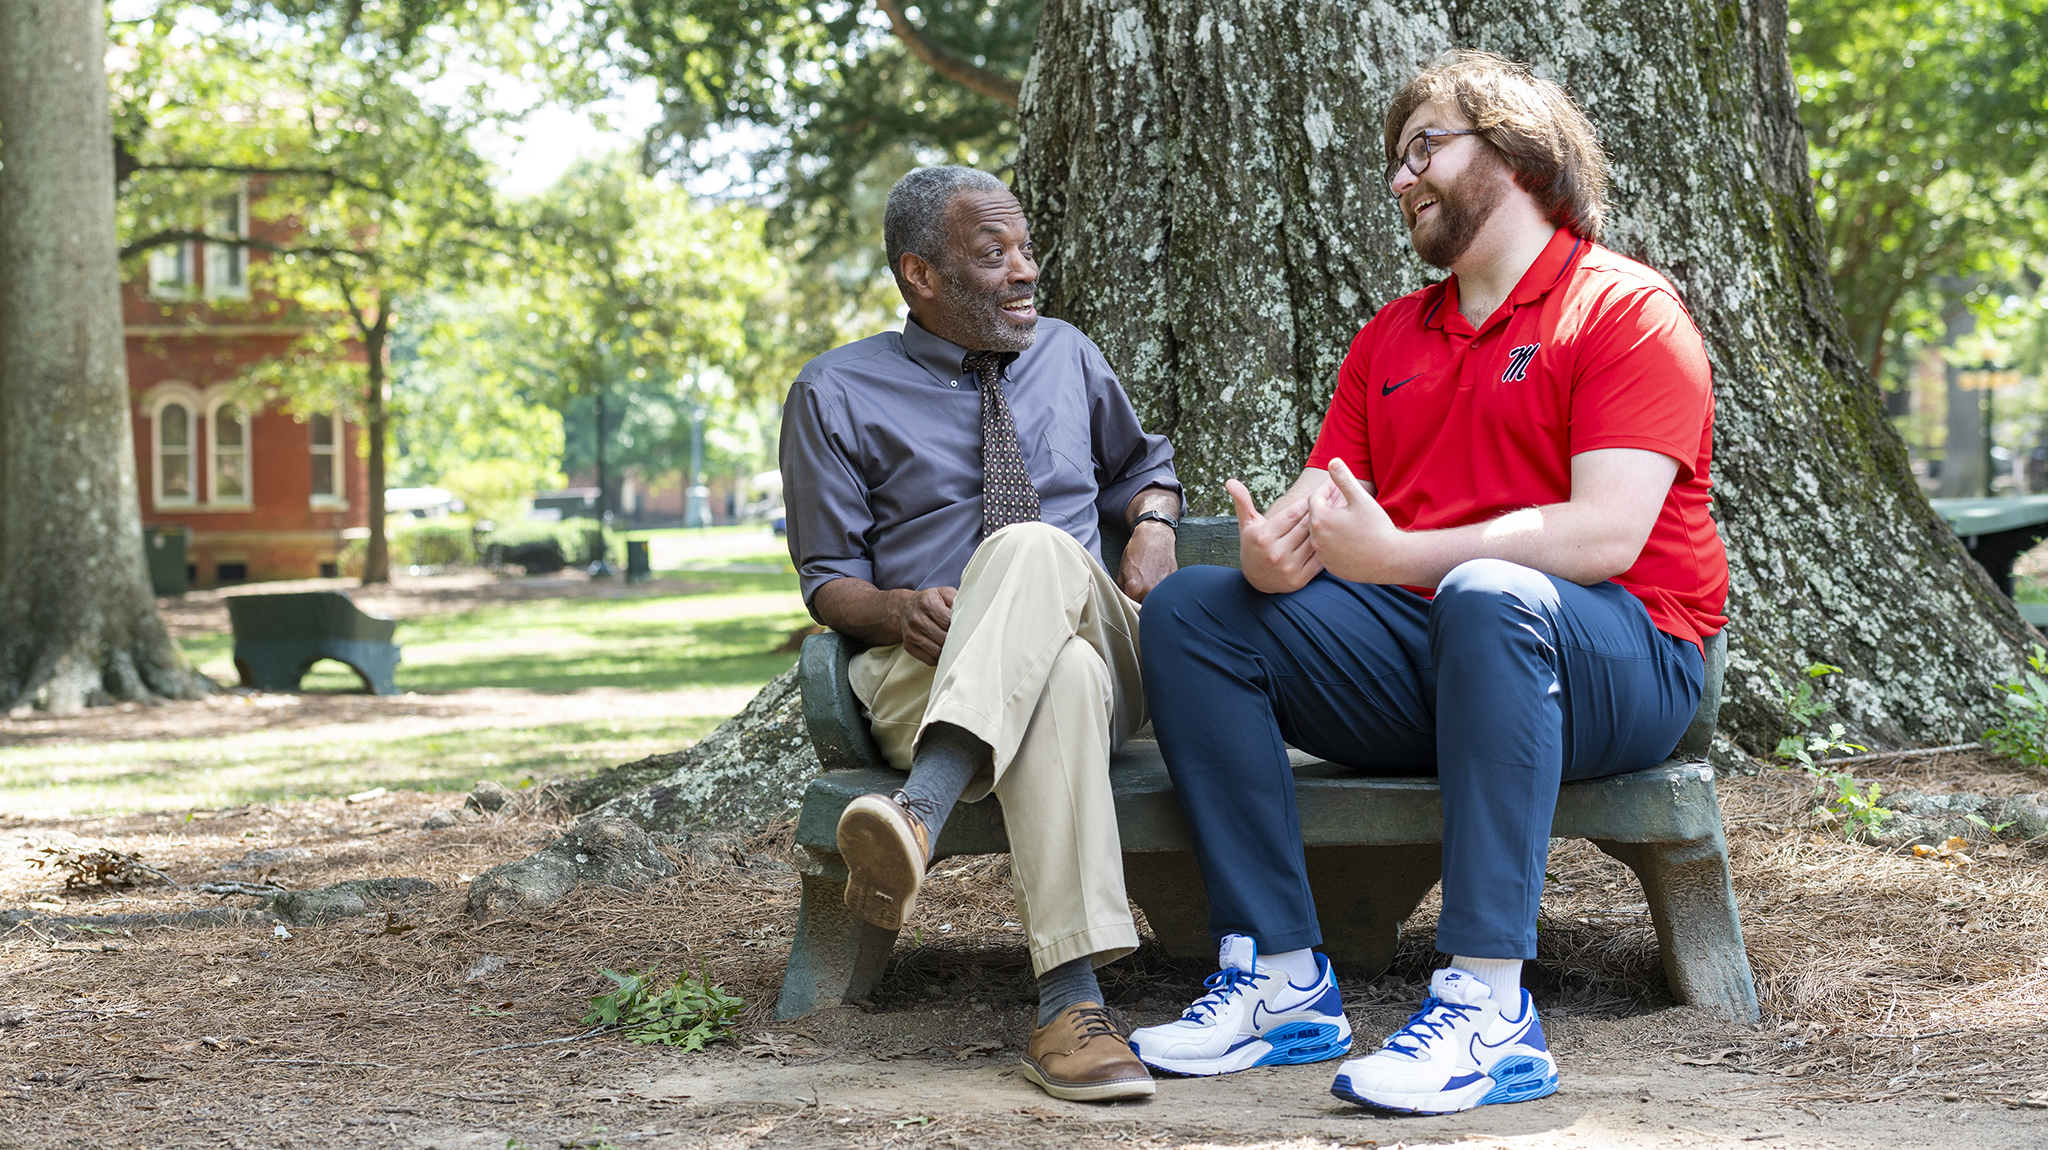 Kirk Johnson (left), associate professor of sociology and African American studies, and Randy Morgan, learning specialist for Student Academic Services, reconnect in the Grove. Johnson first inspired Morgan to study sociology, which has become one of his passions, and later persuaded him to complete his master’s degree. Photo by Srijita Chattopadhyay/Ole Miss Digital Imaging Services